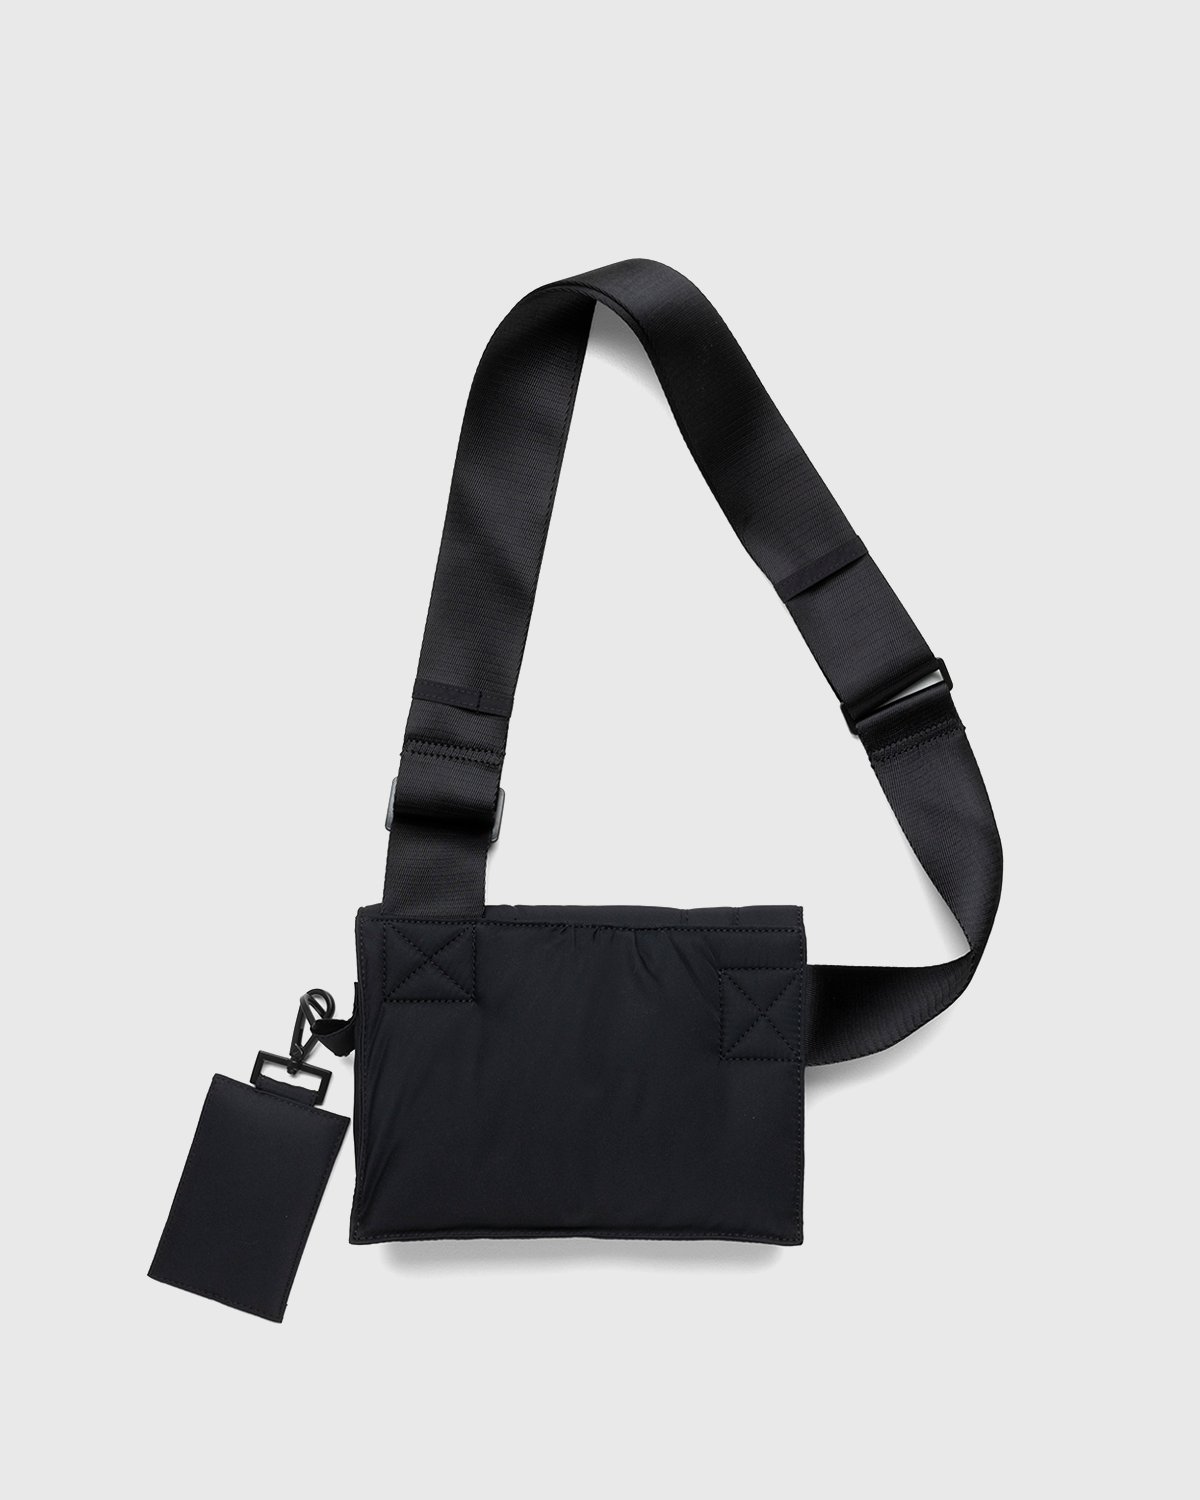 A-Cold-Wall* – Convect Holster Bag Black | Highsnobiety Shop